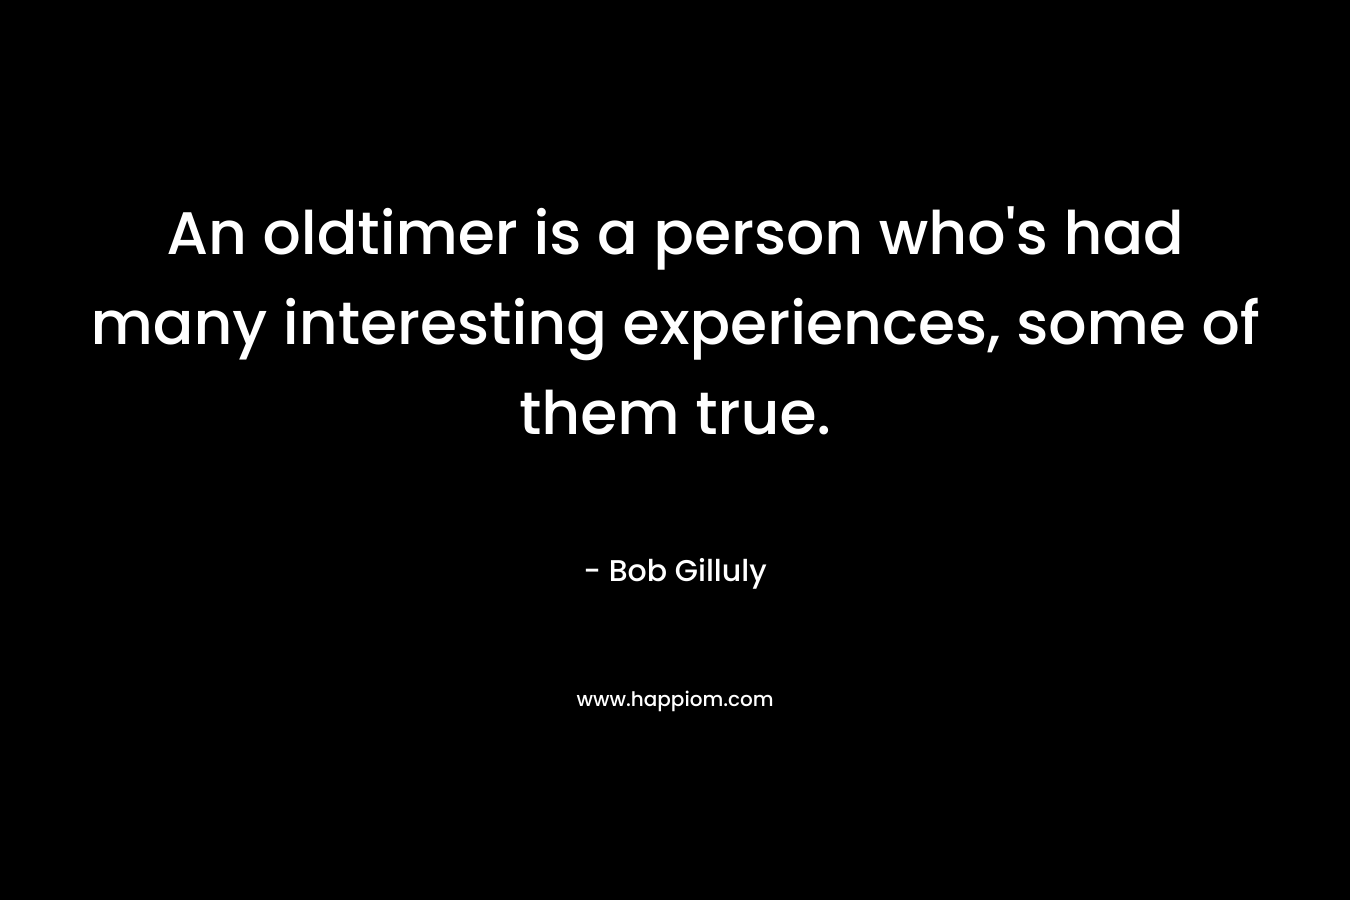 An oldtimer is a person who's had many interesting experiences, some of them true.